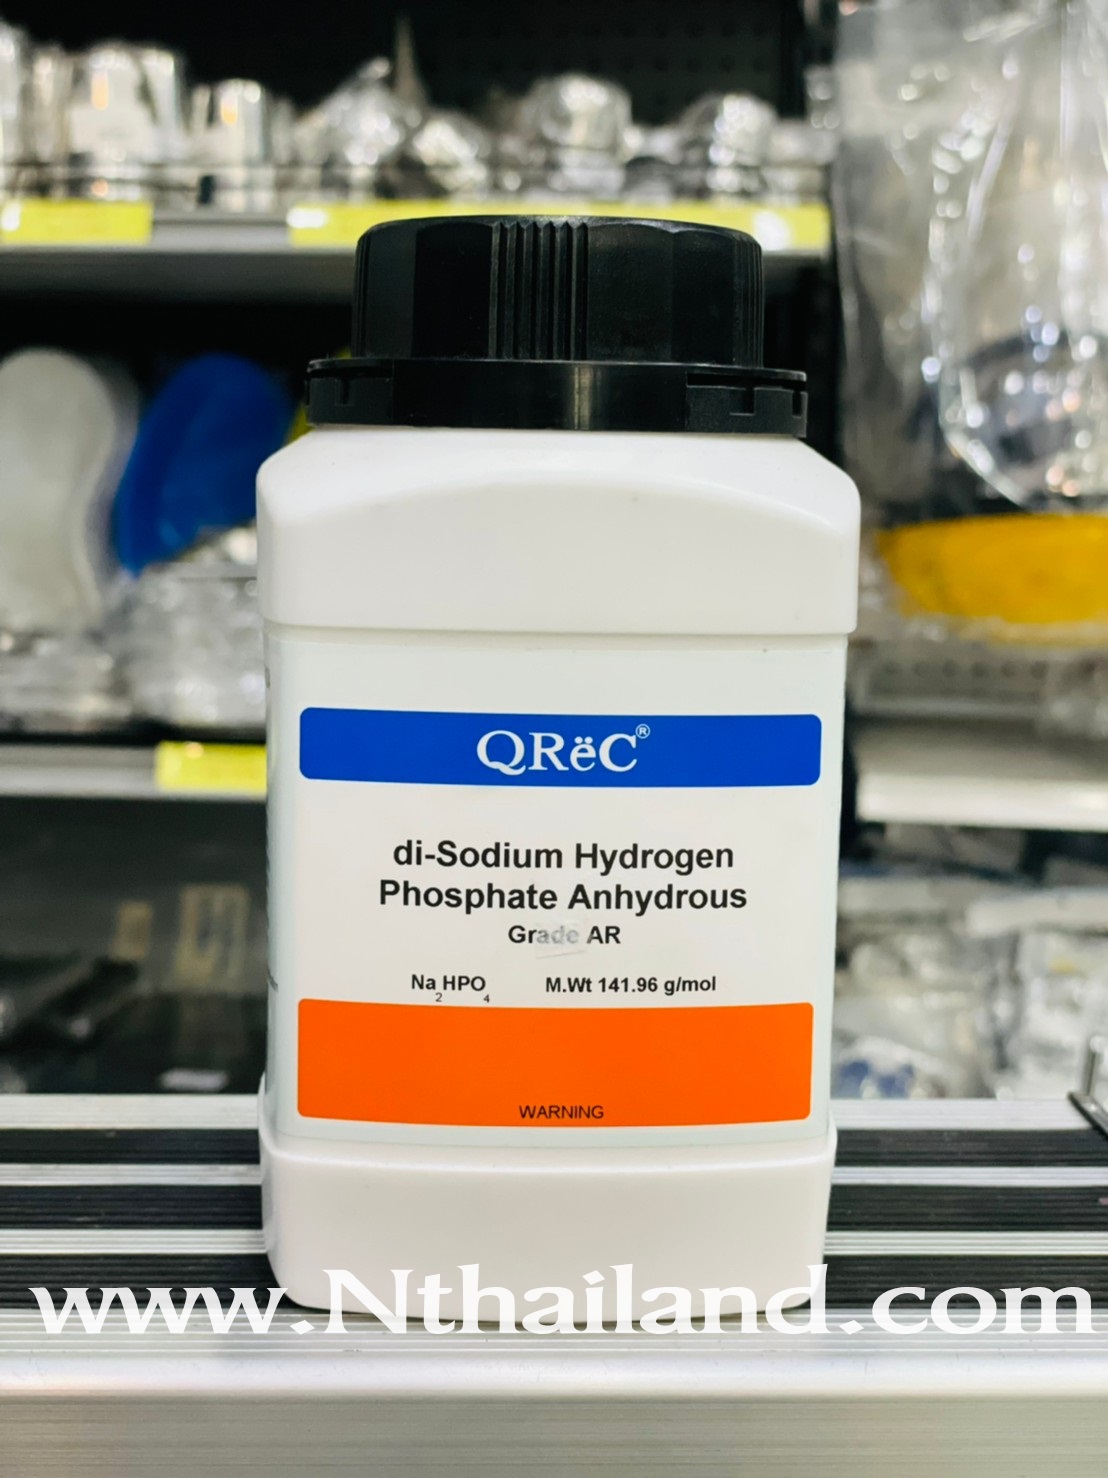 QREC di-Sodium Hydrogen Phosphate Anhydrous 500g